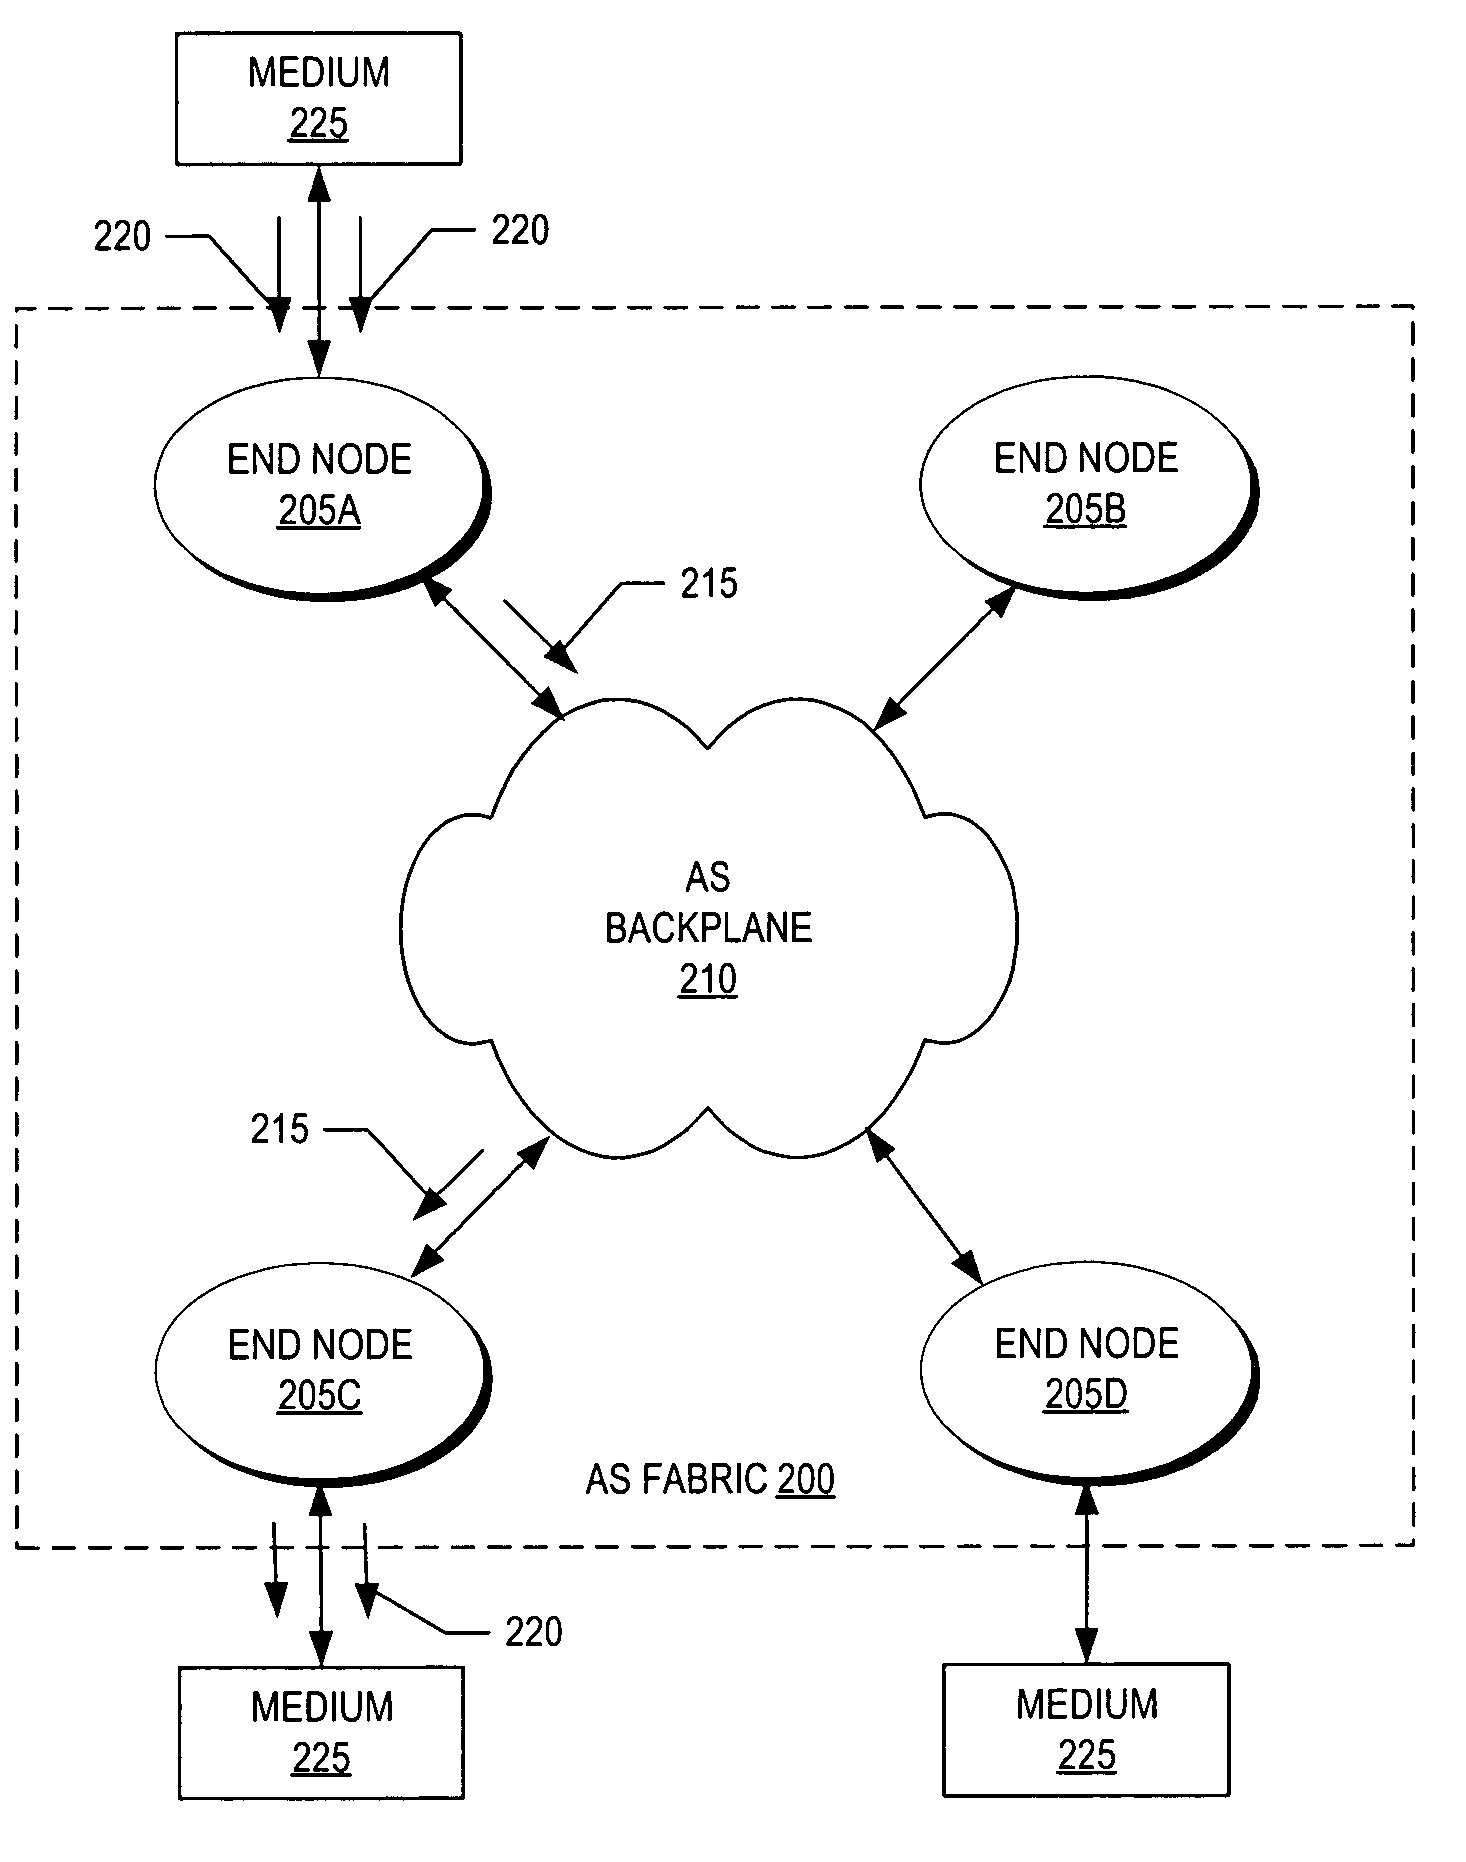 Packet aggregation protocol for advanced switching